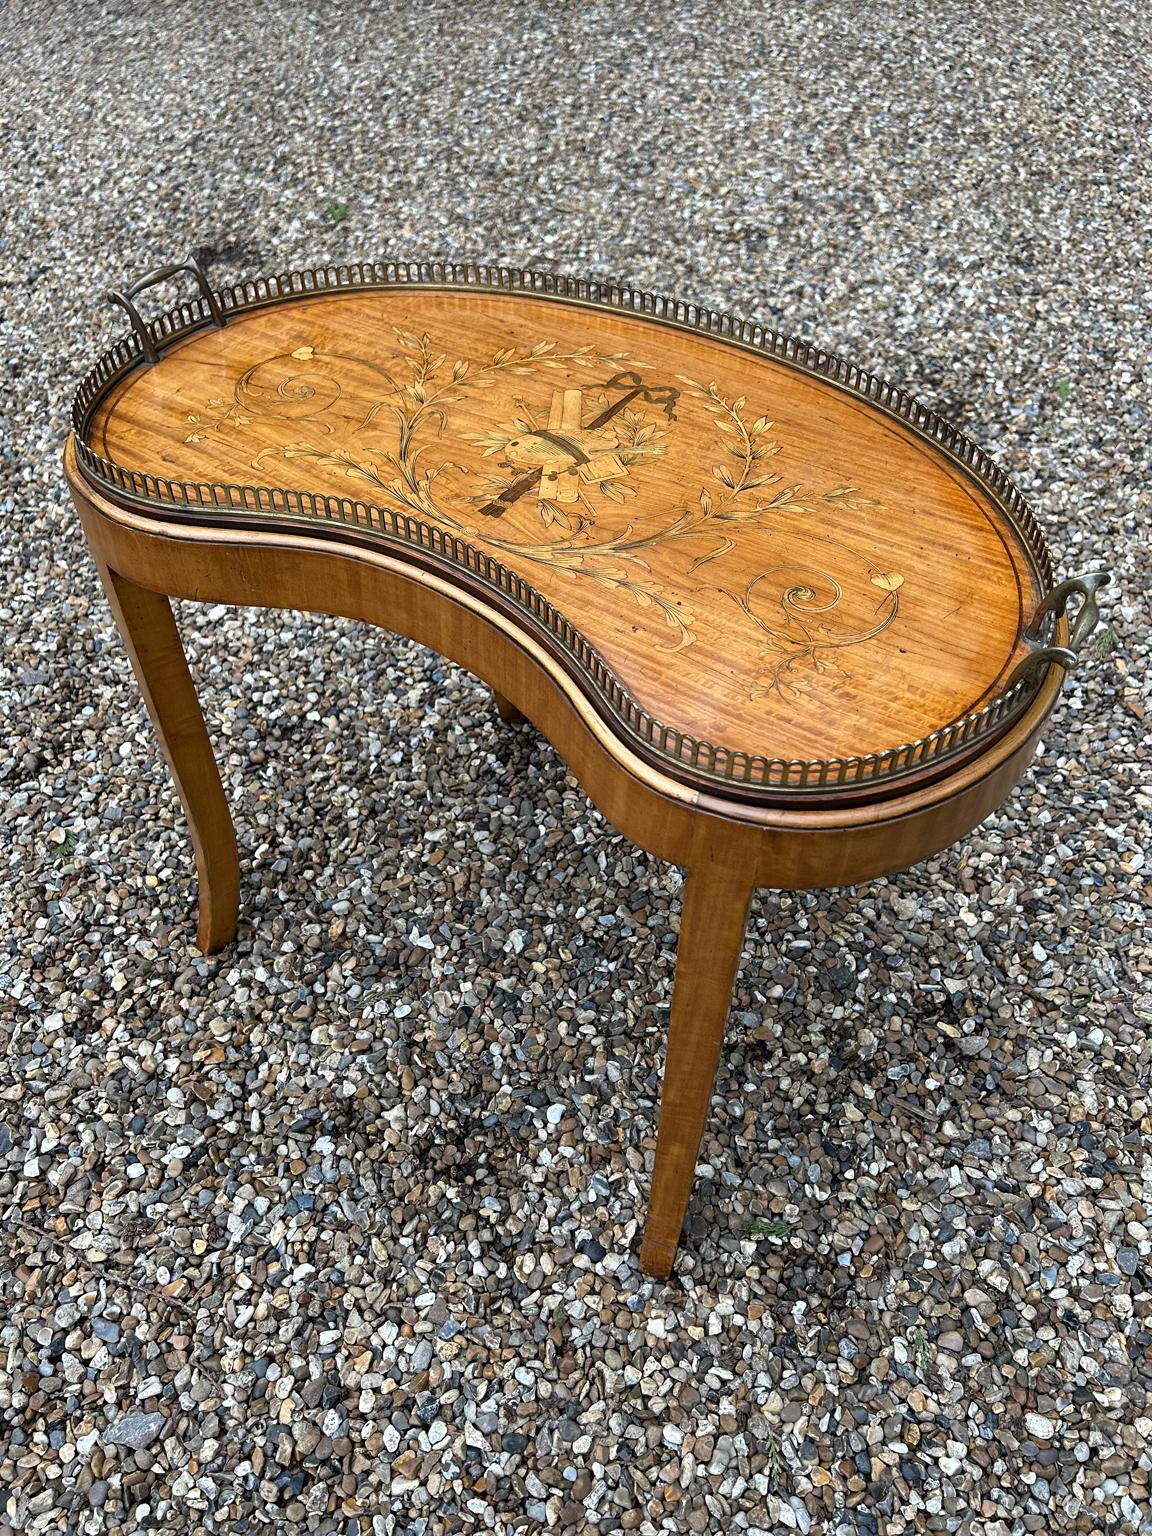 Edwardian 19th Century Inlaid Satinwood Tray on (Stand made later) For Sale